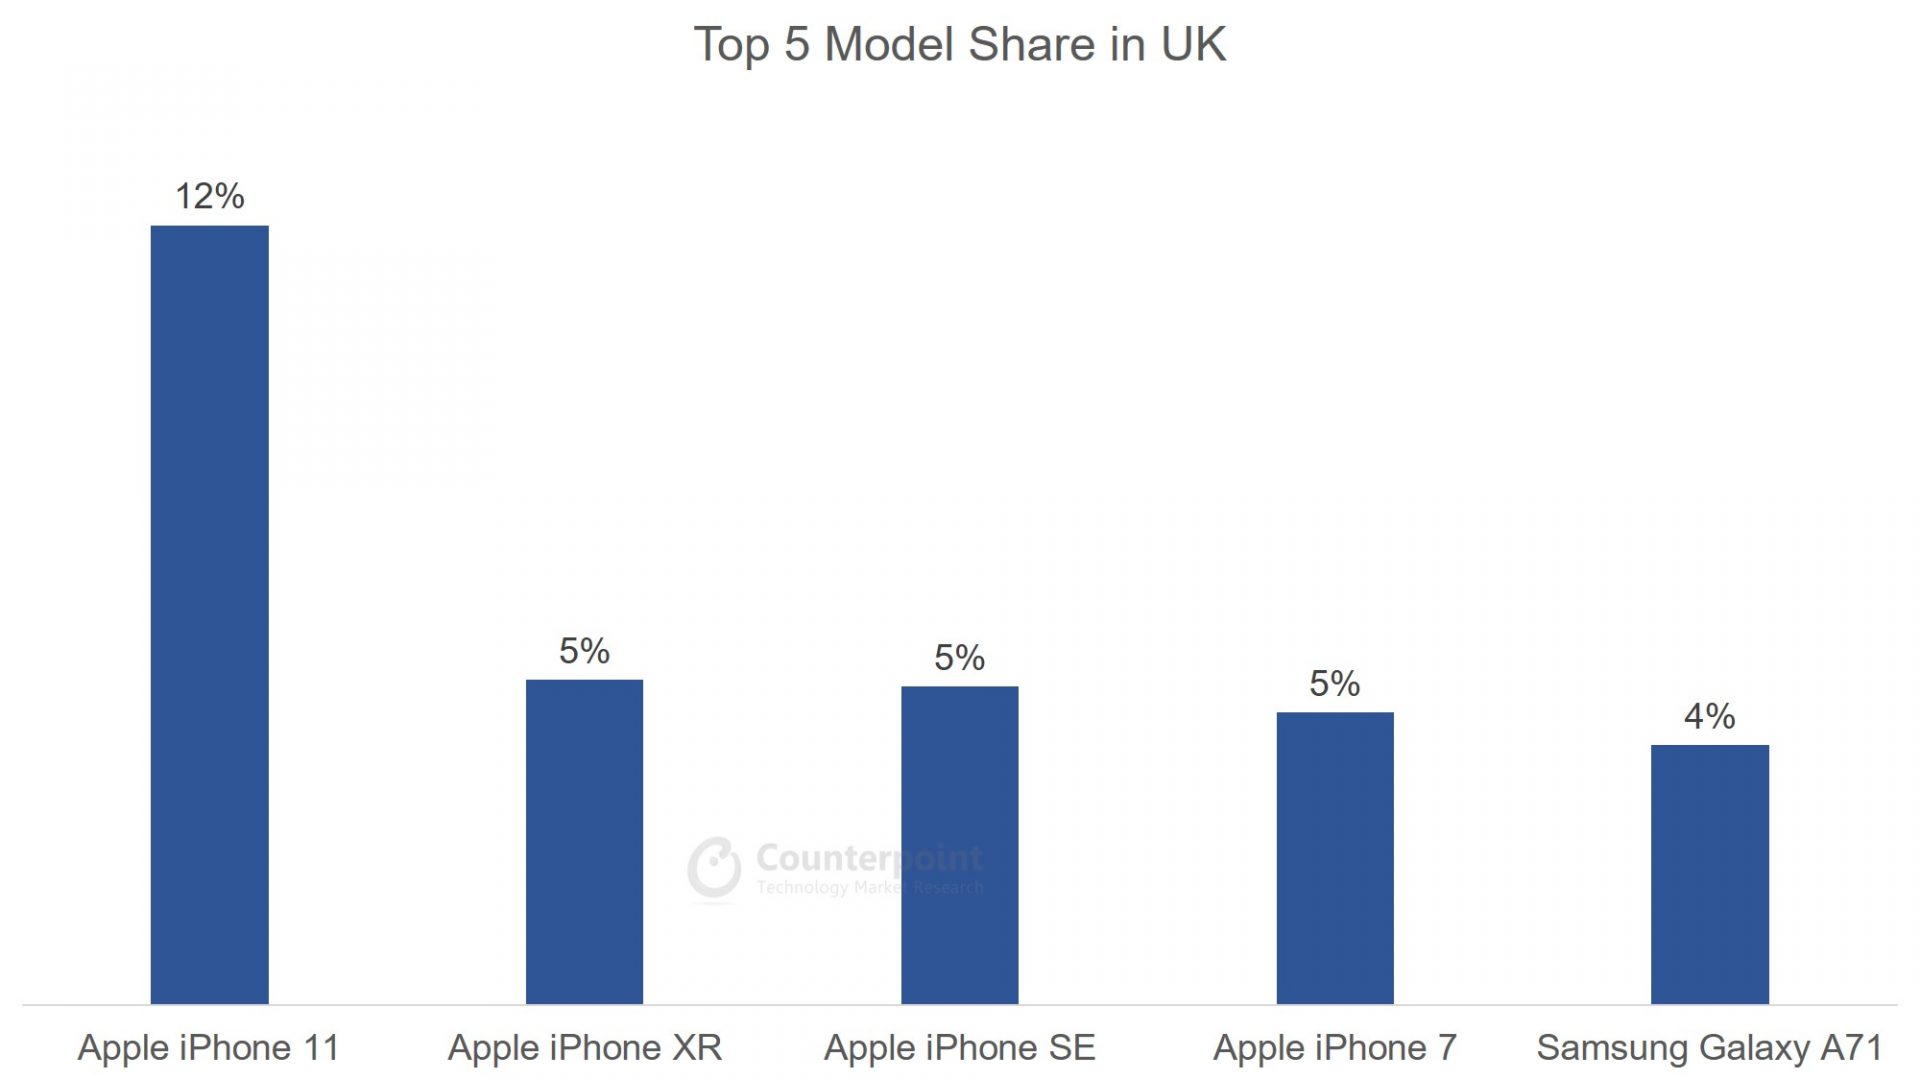 Counterpoint Top 5 Smartphone Model Share in UK